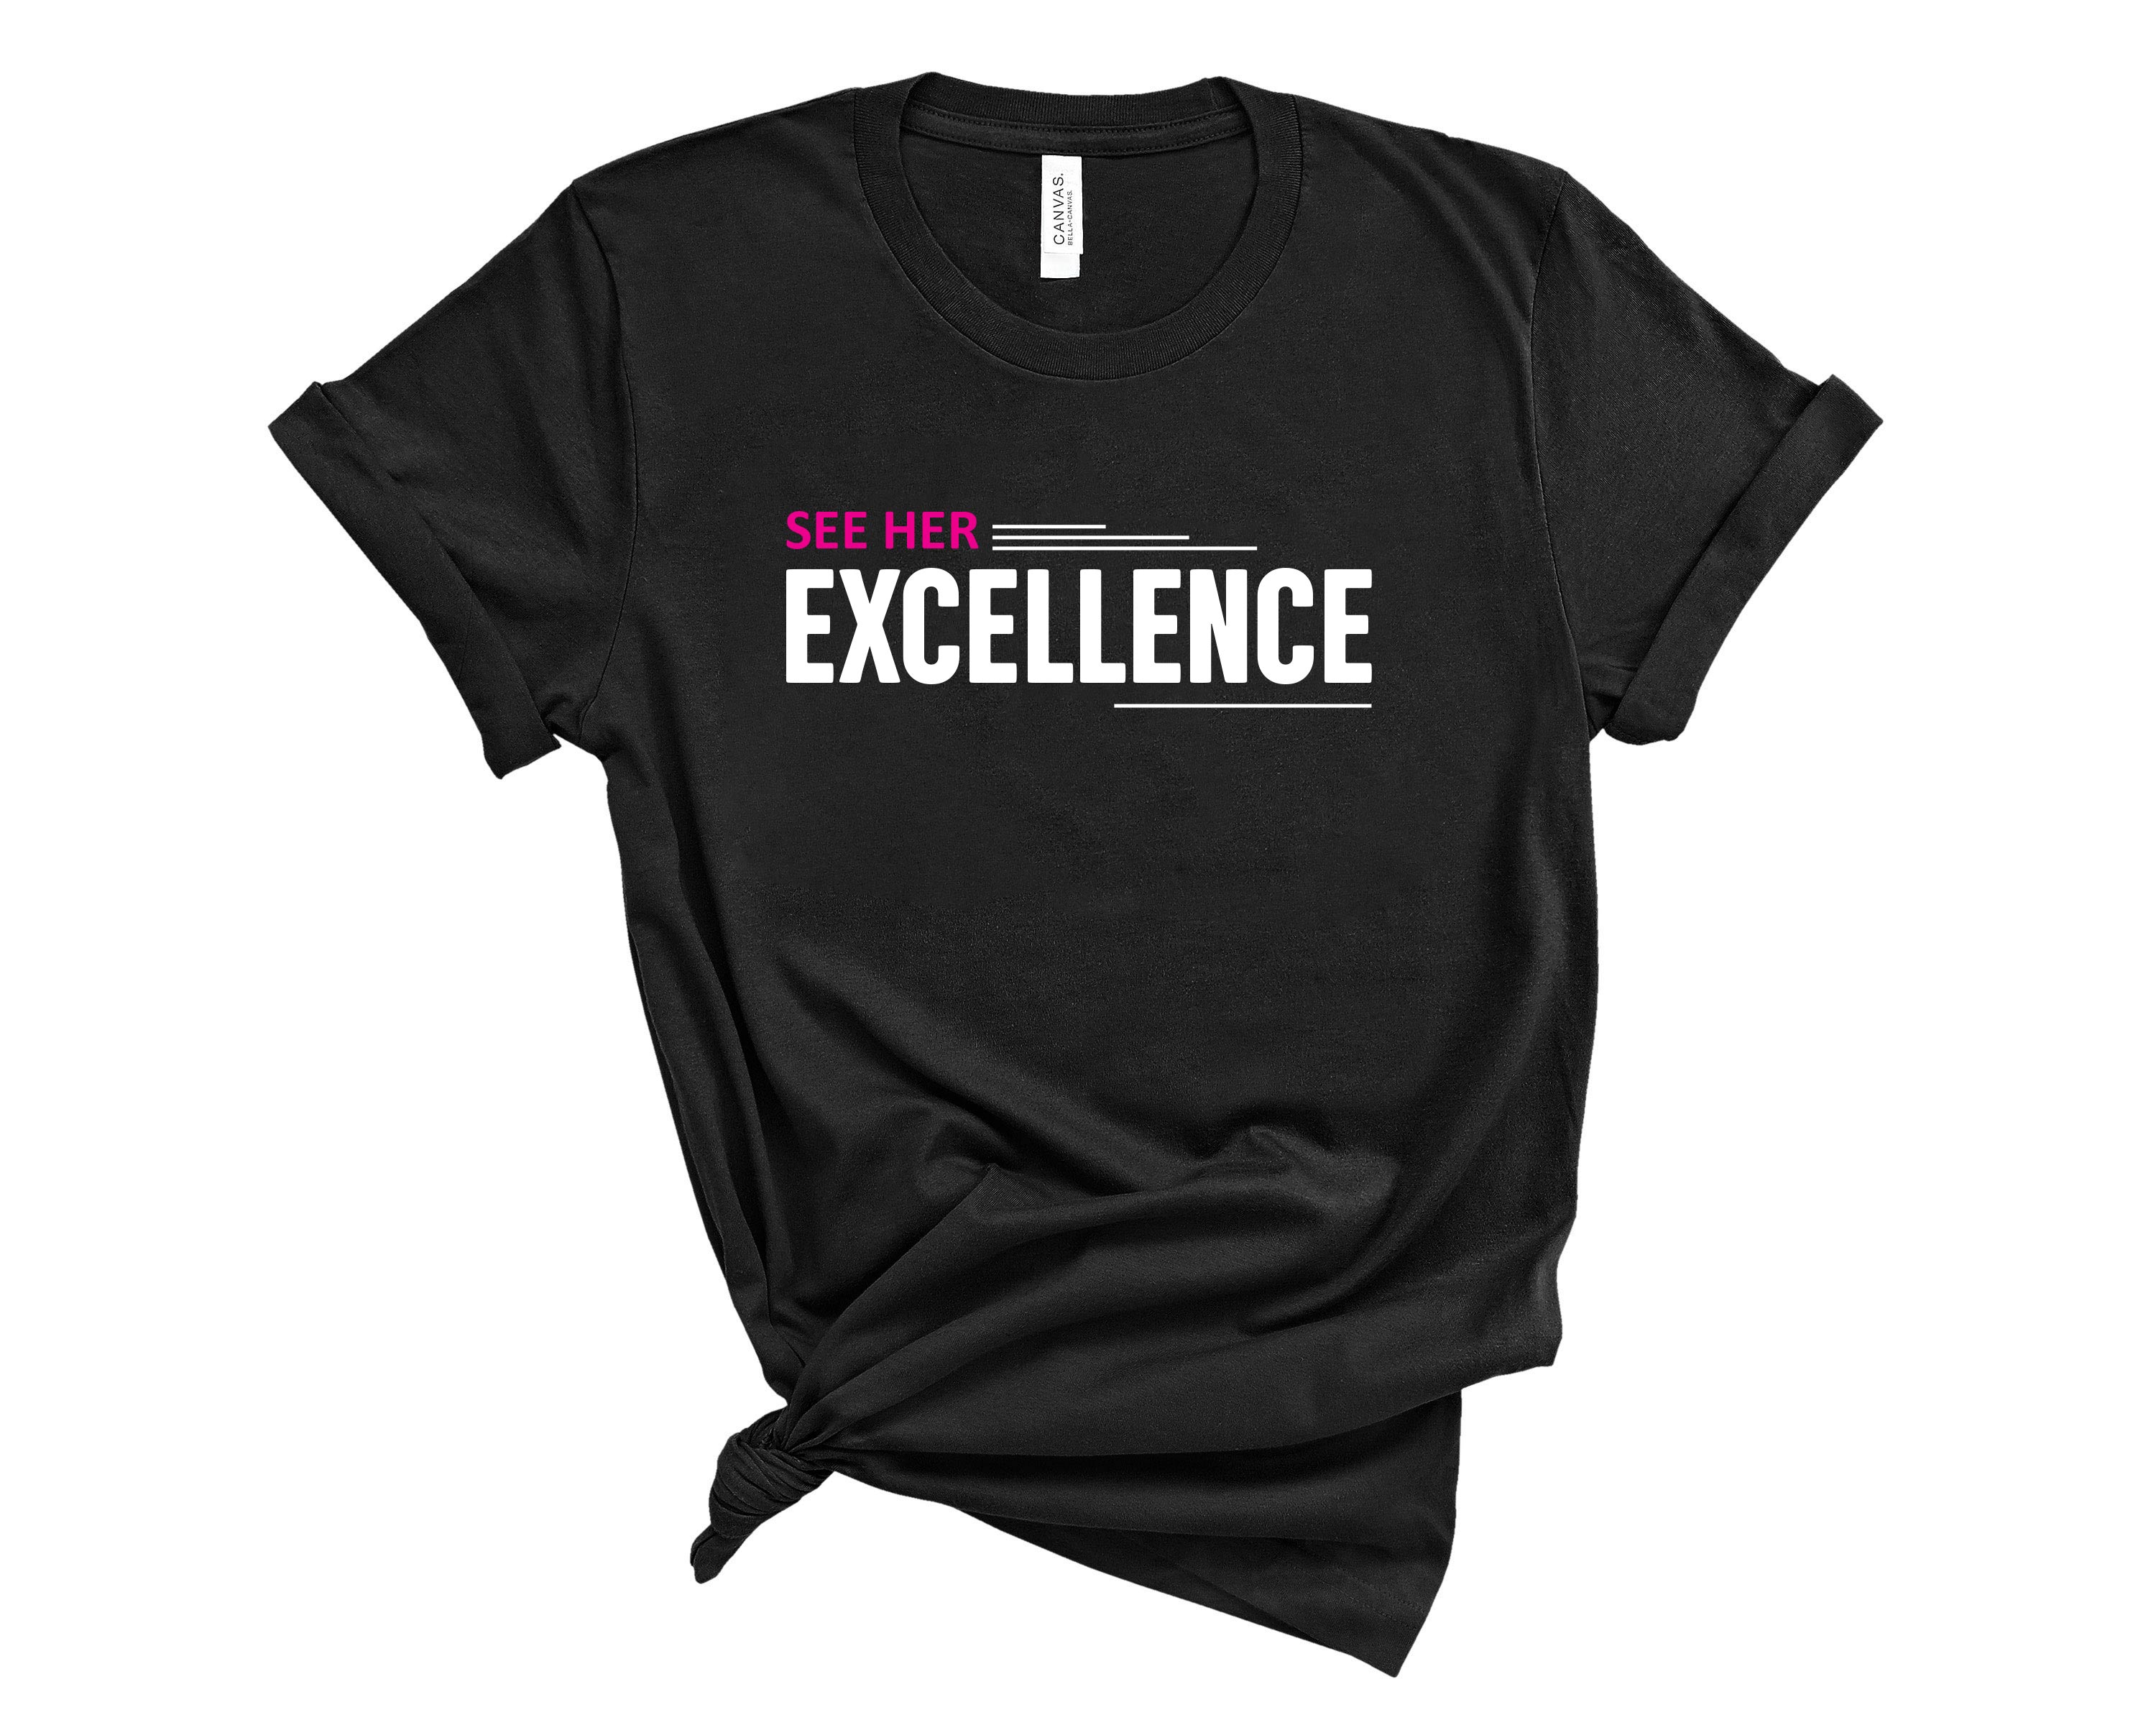 S.H.E. (See Her Excellence)  Premium T-Shirt